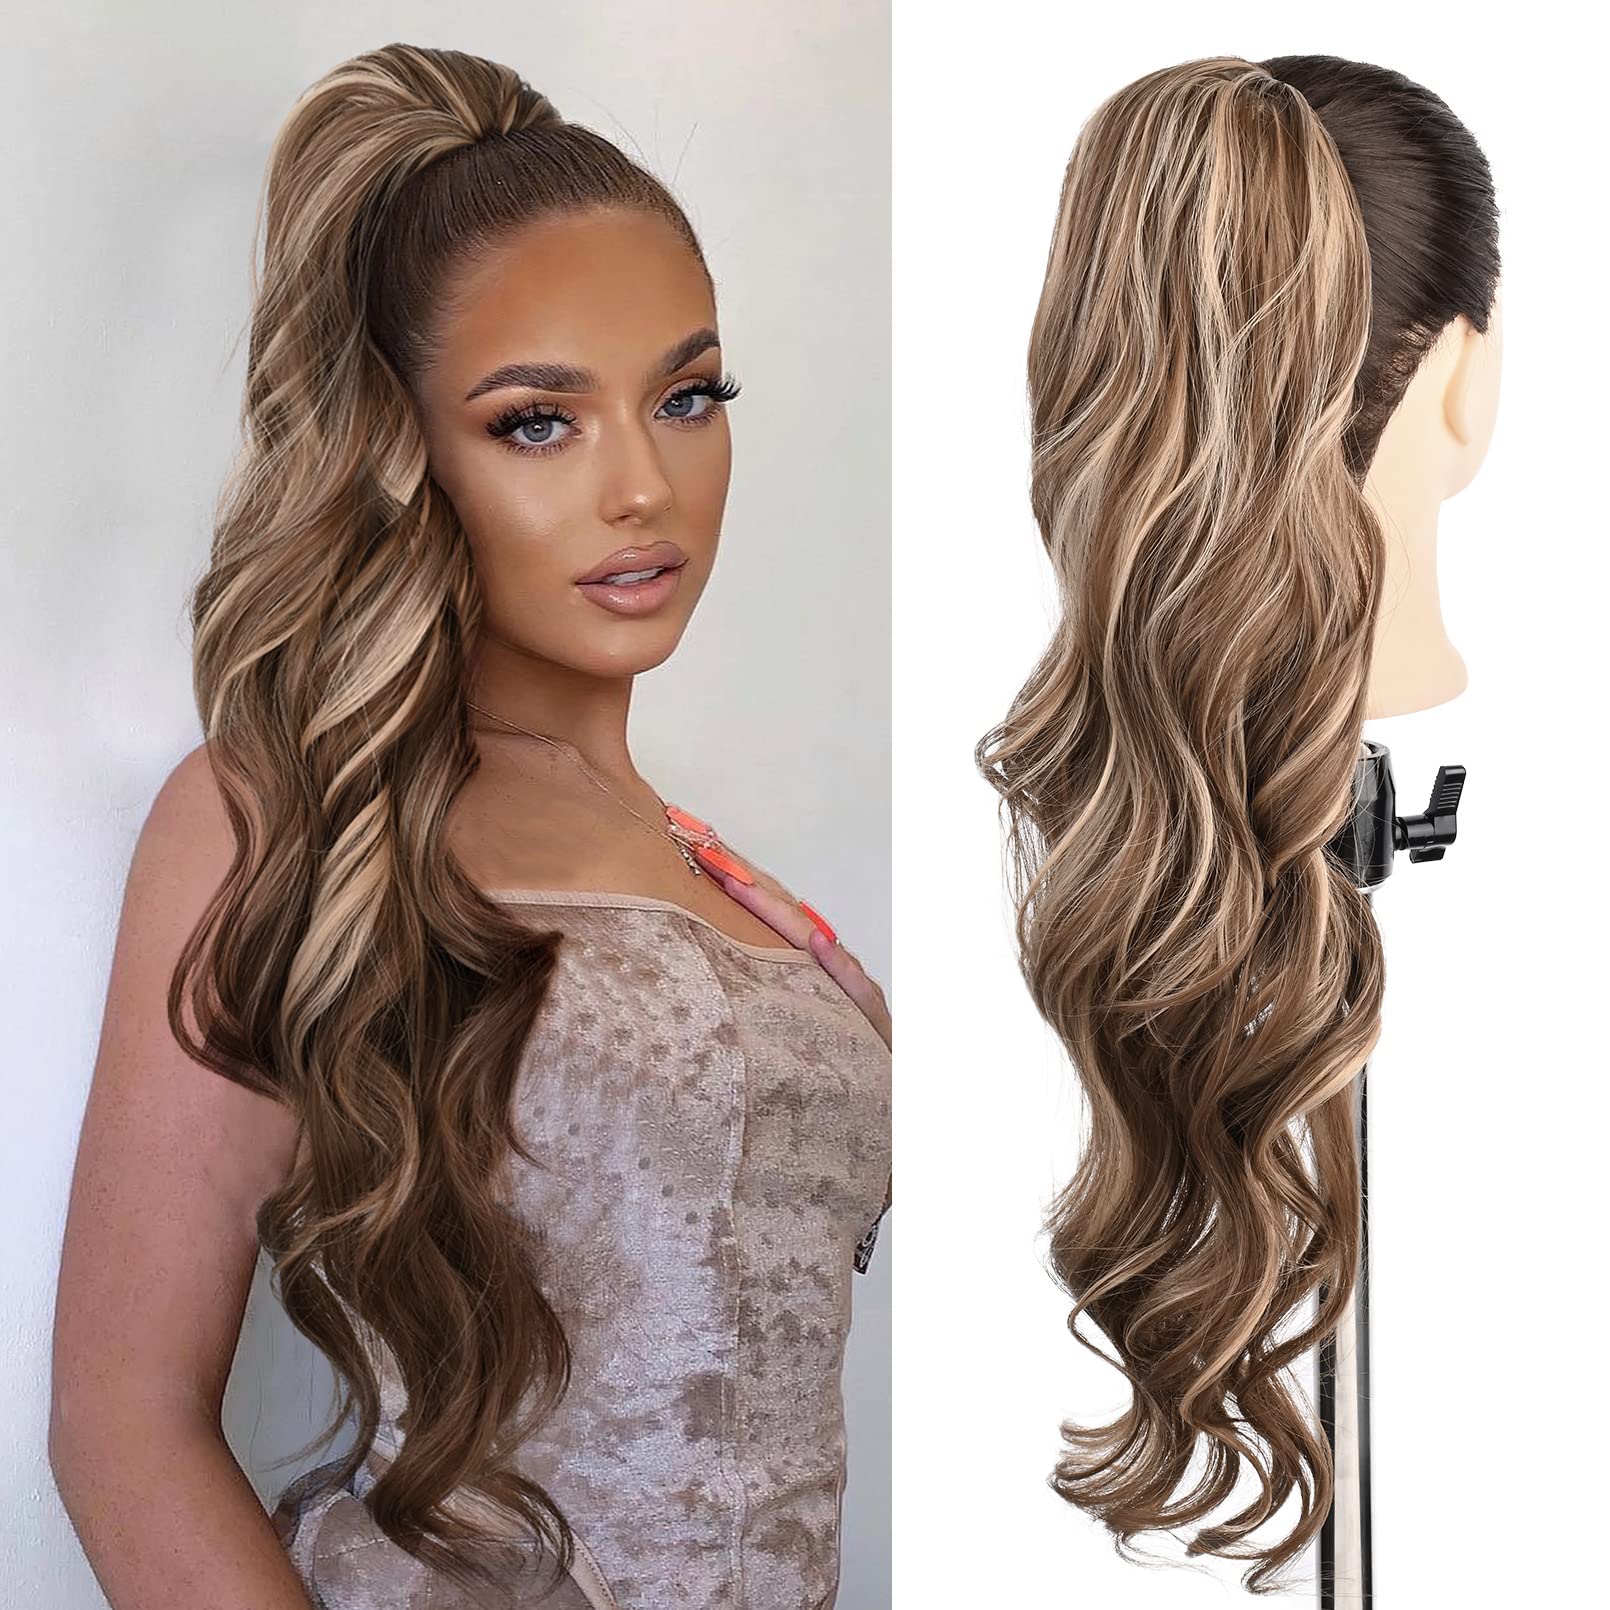 SEIKEA Ponytail Extension Drawstring Long Wavy Pony Tail for Black Women  Natural Soft Clip in Ponytail Hair Extension Synthetic Heat Resistant  Hairpiece 26 Inch 160 Gram Chestnut Brown with Dirty Blonde Highlights 26  Inch …